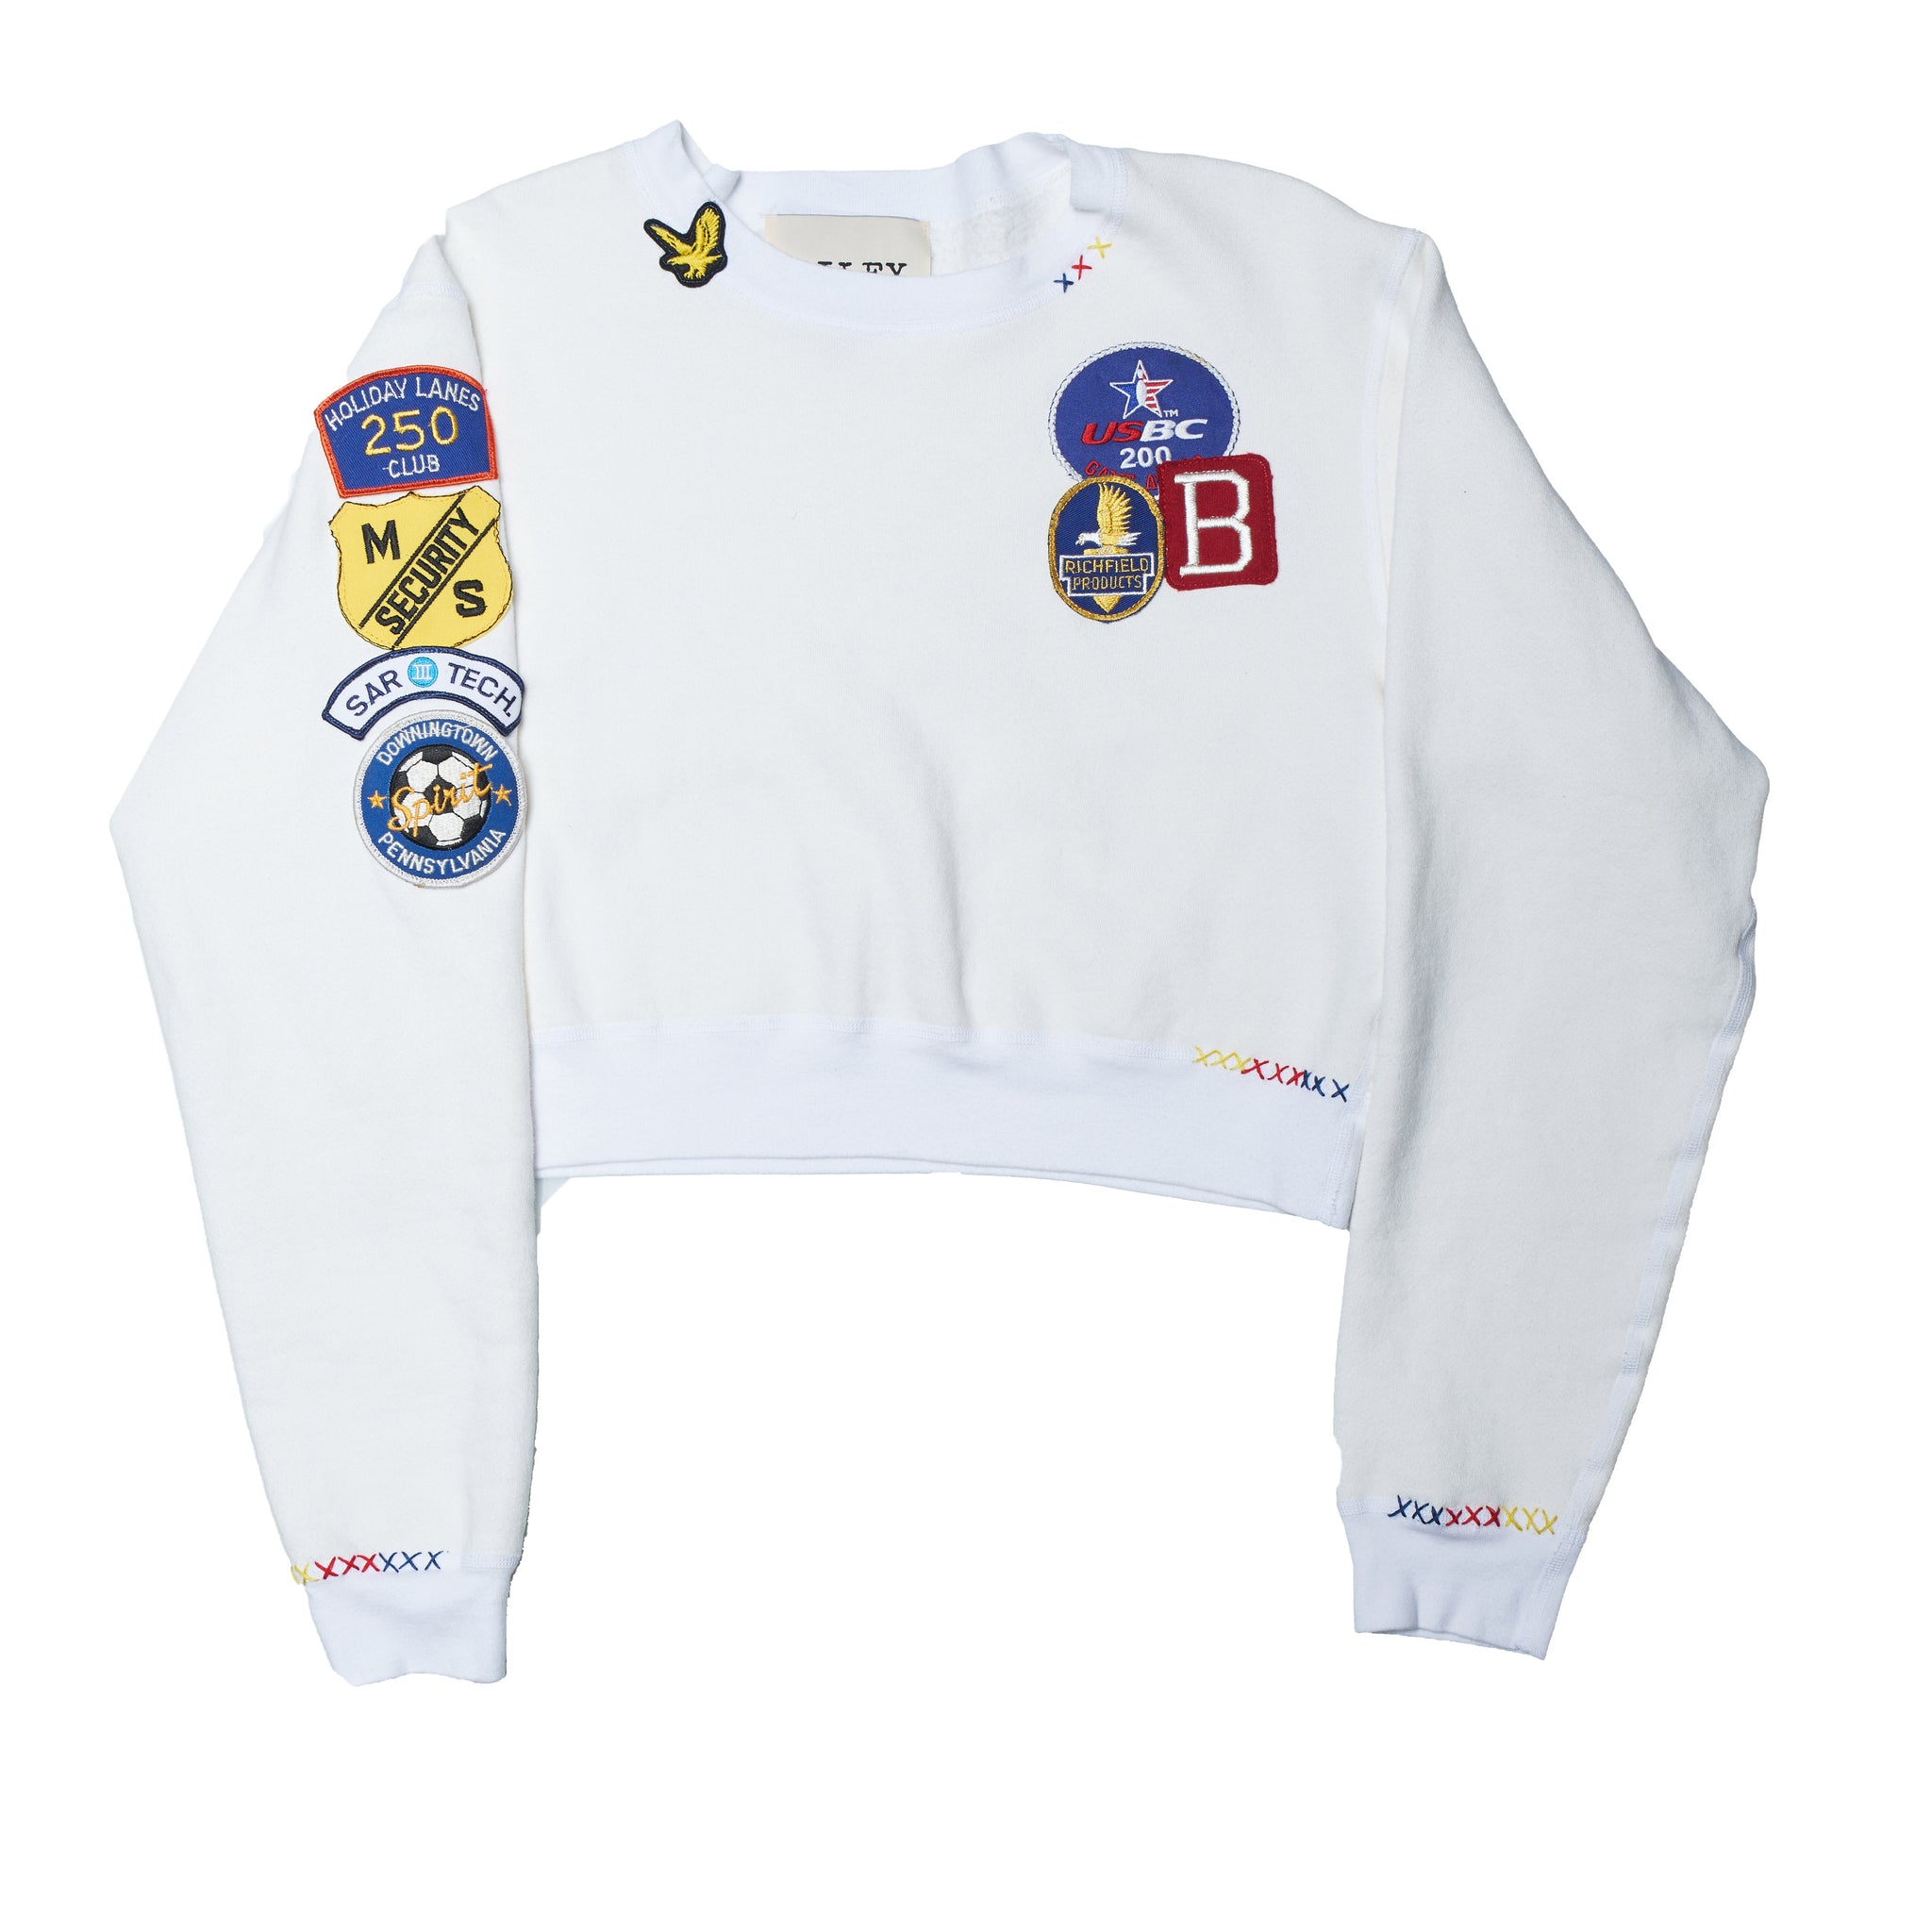 Riley Vintage All Patched Up Crew Sweatshirt in White ships in 2 